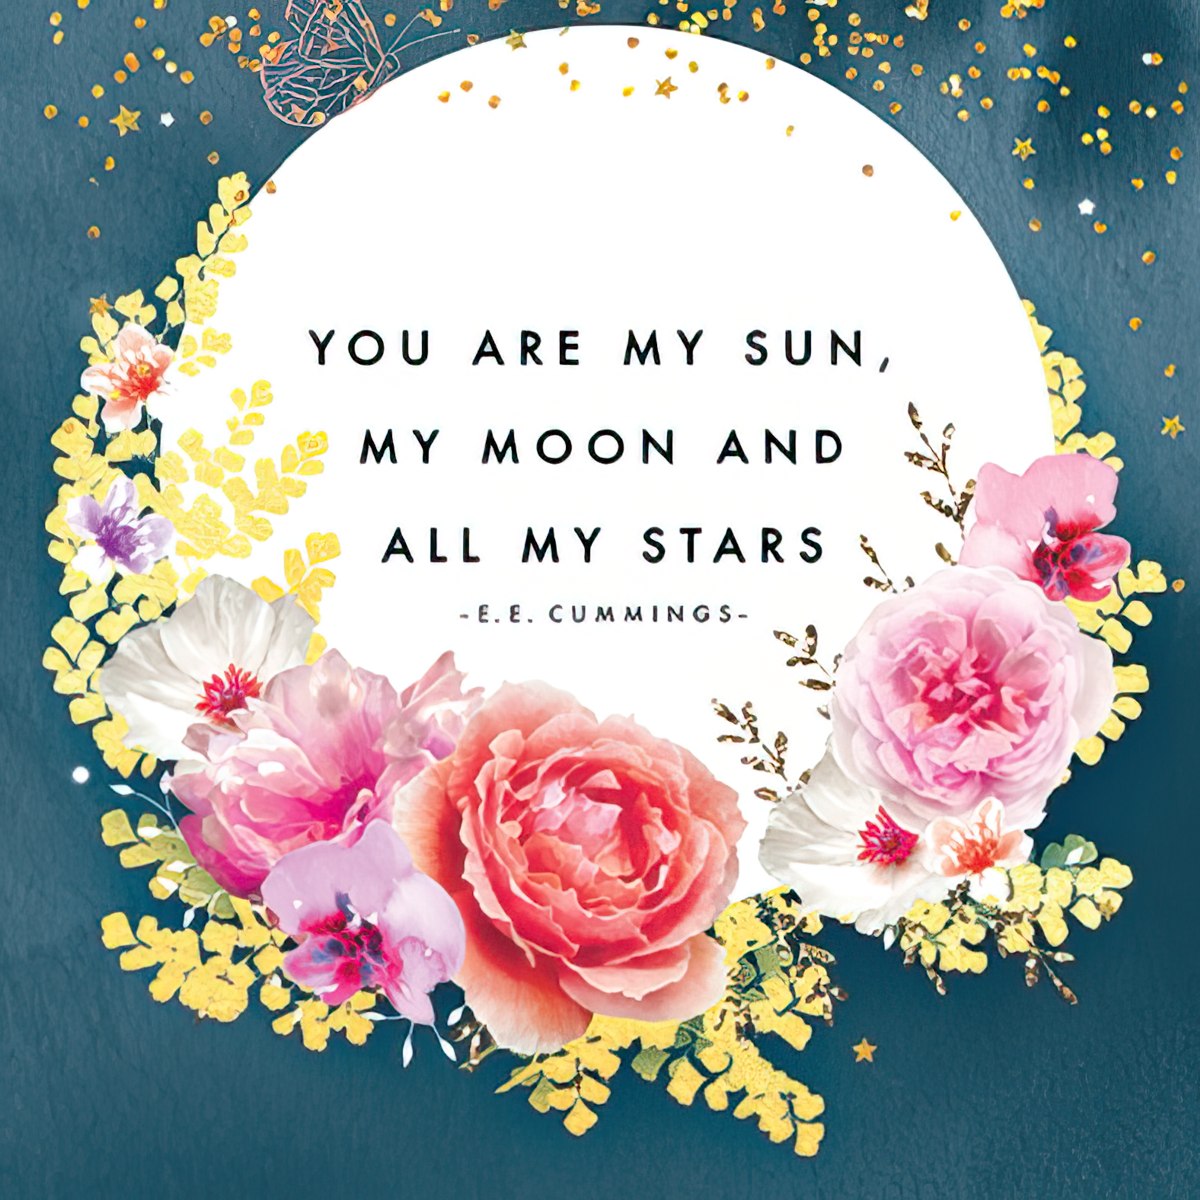 You Are My Sun, My Moon and All My Stars